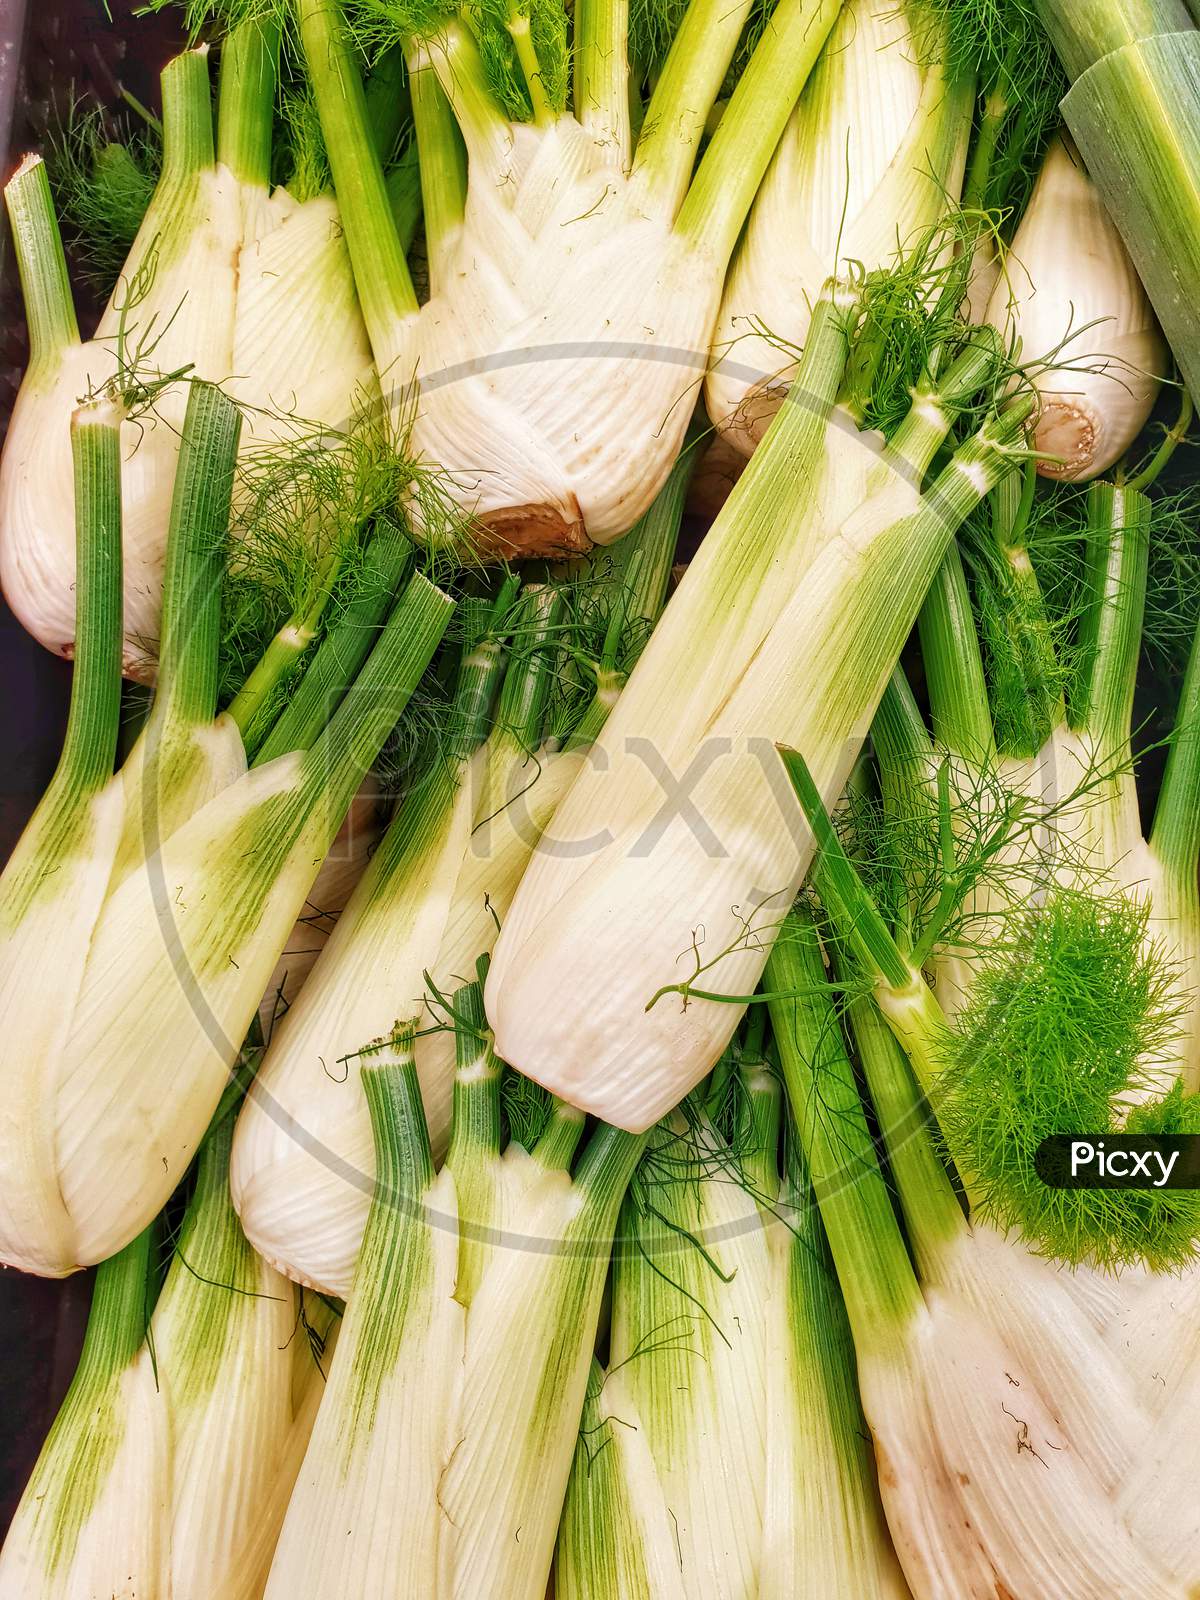 Fennel Bulb With Leaves For Sale In Market